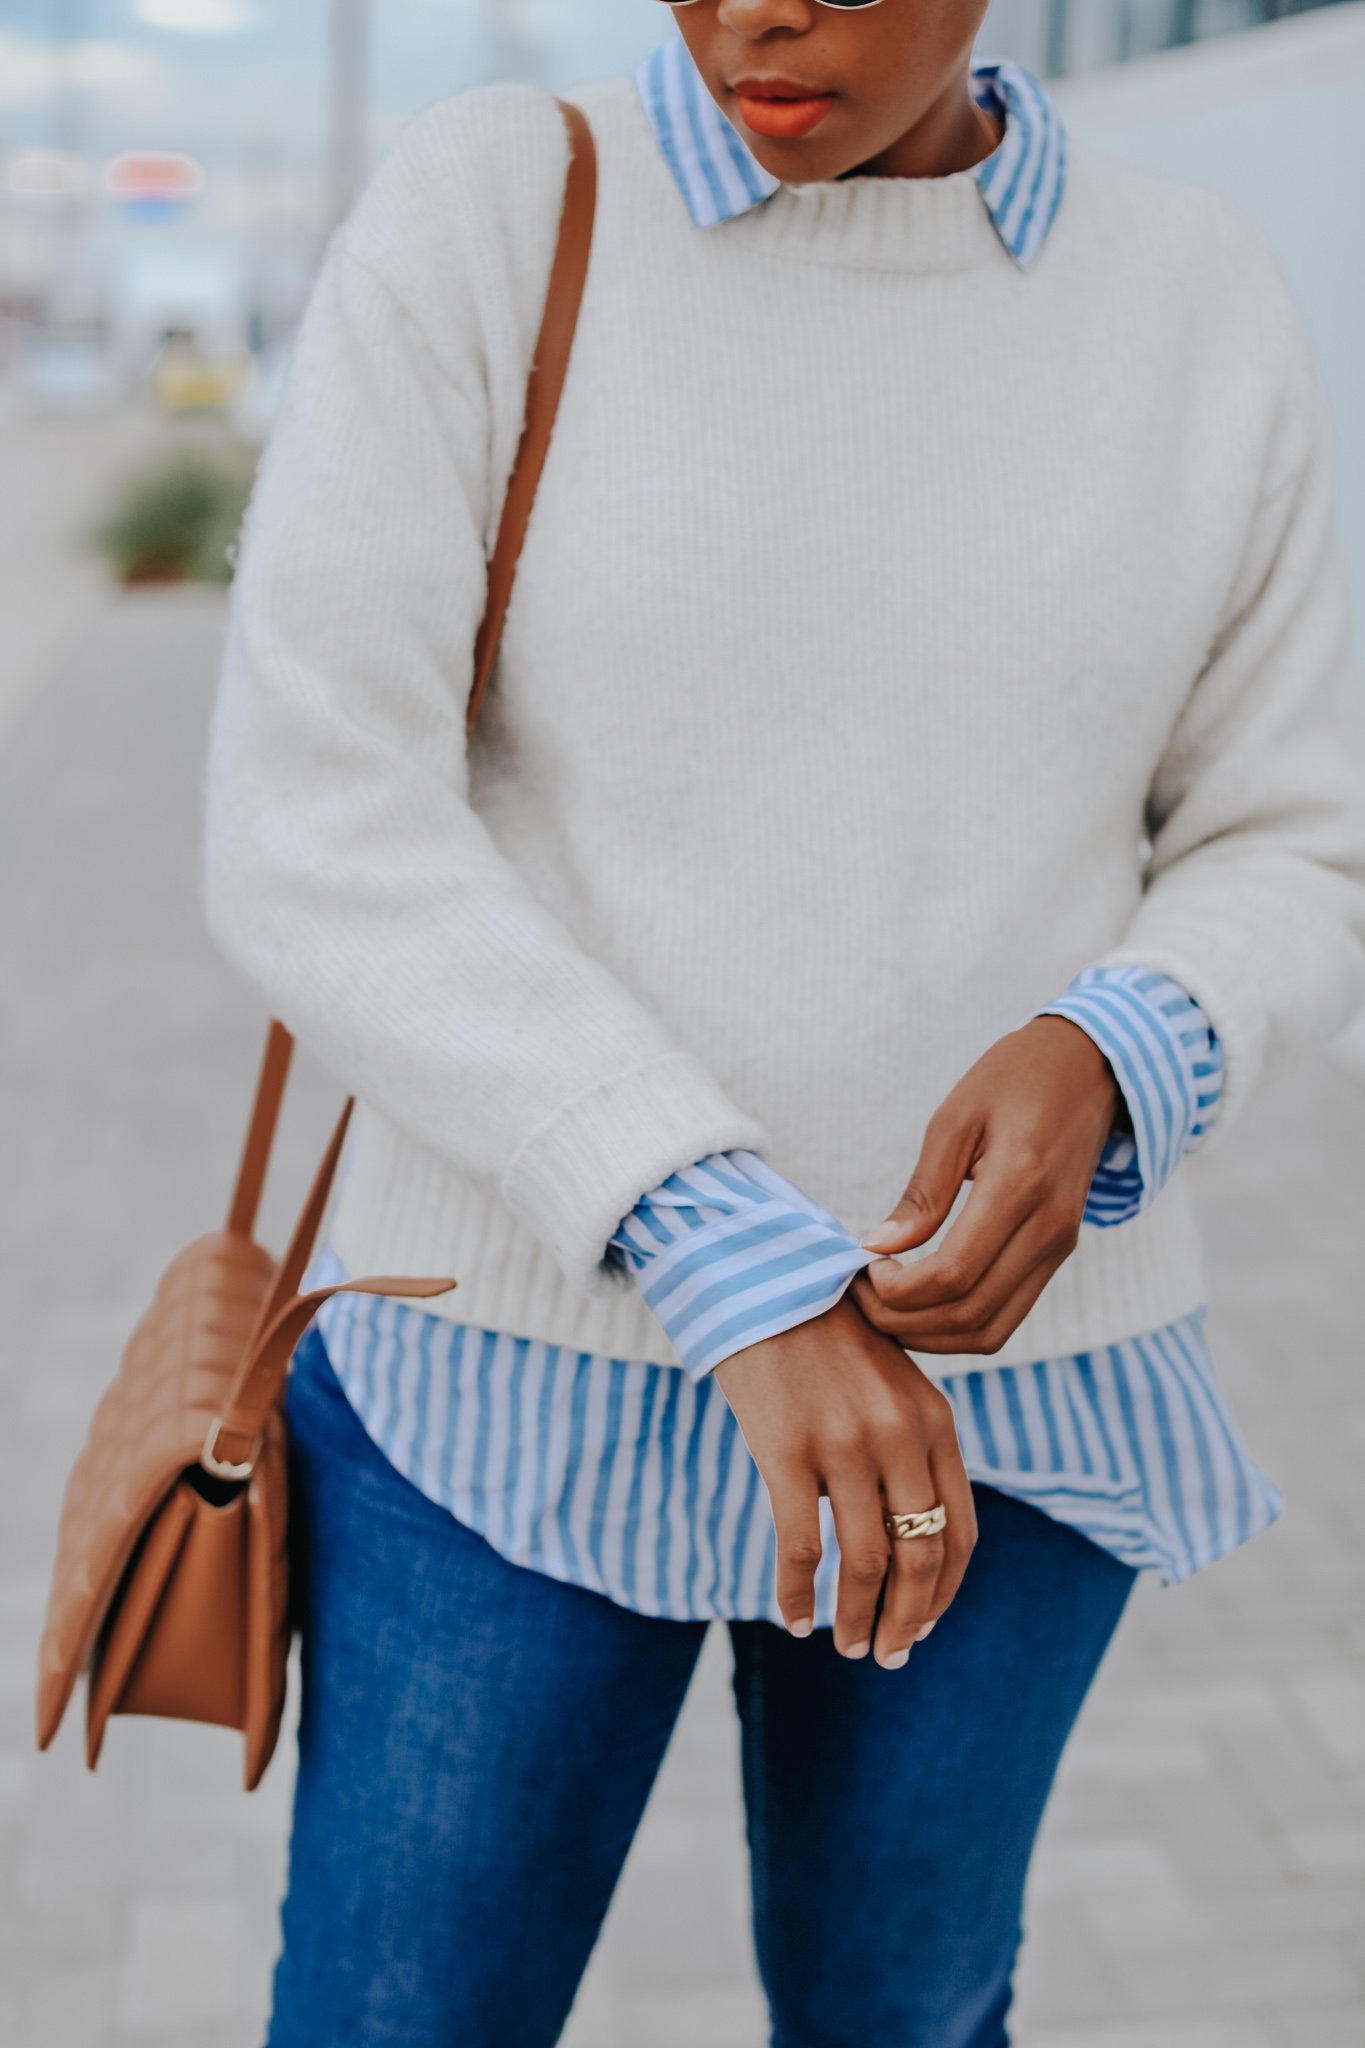 Mary's Little Way in A White Crewneck Sweater, a Blue and White Striped Boyfriend Shirt, Blue Jeans, and Tan Mules